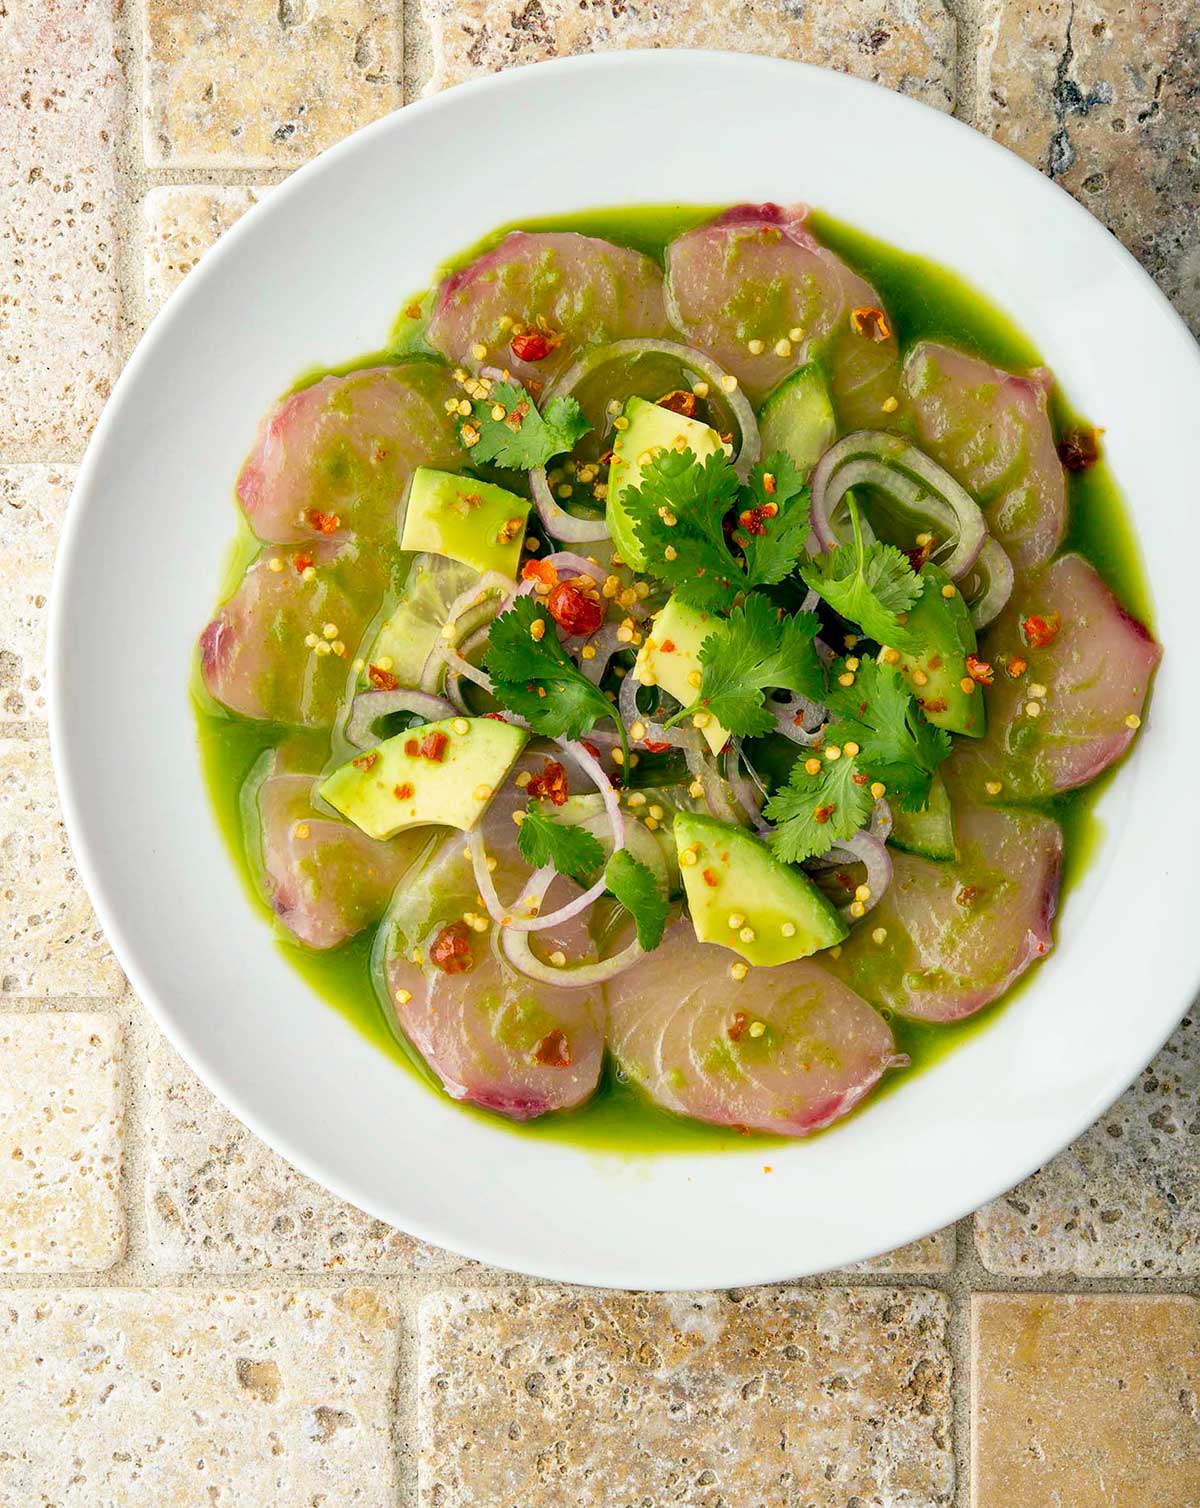 Mexican aguachile recipe on a plate, ready to eat